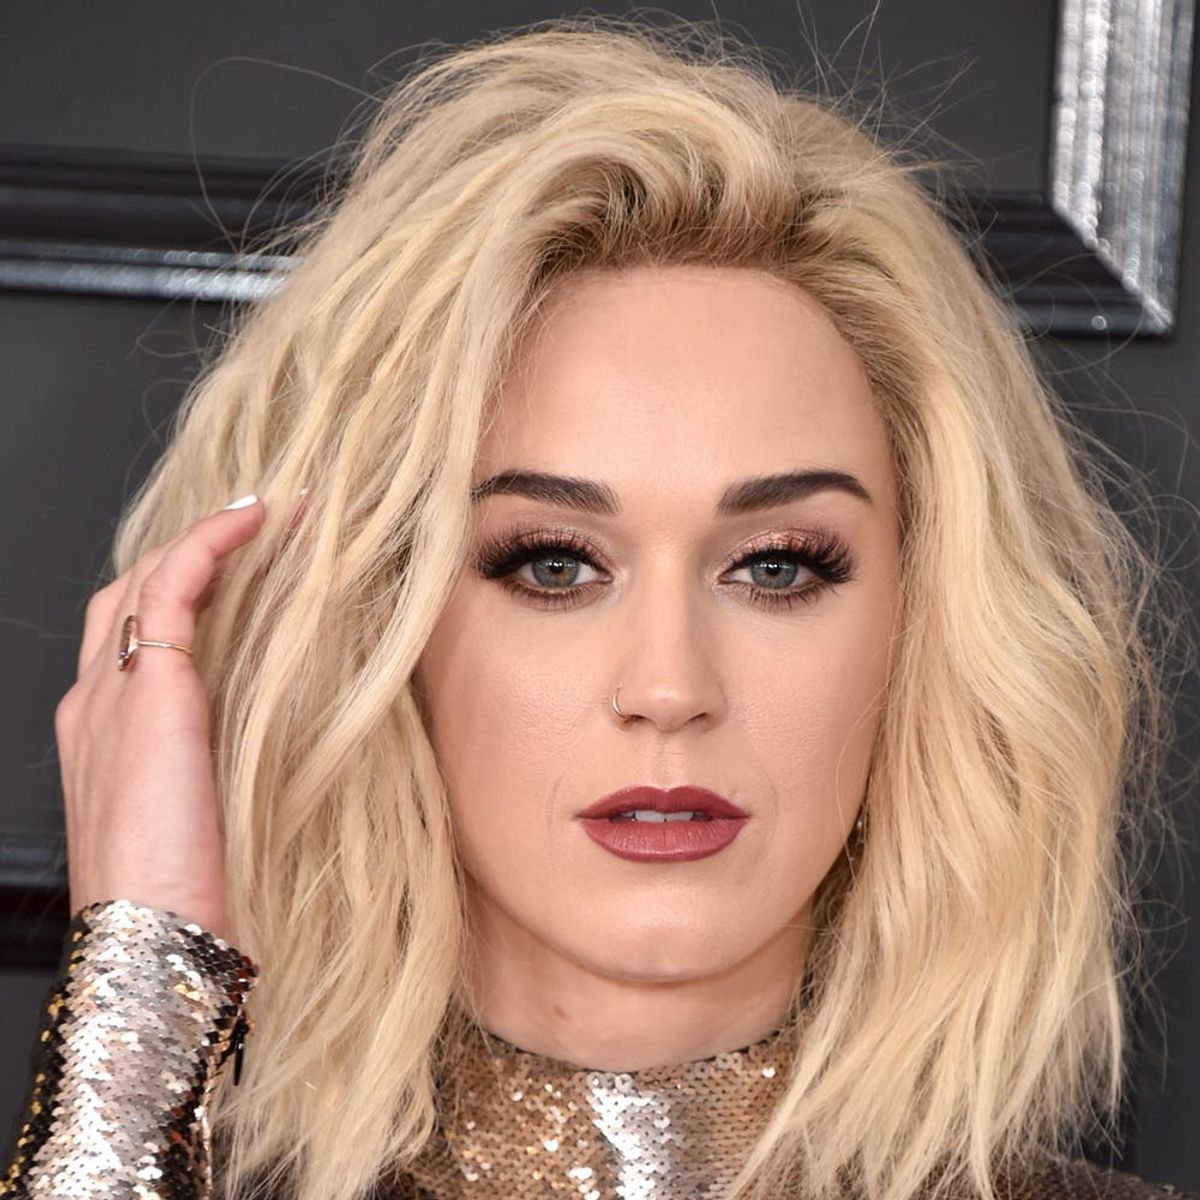 Katy Perry Has Revealed The Reason For Her New Blonde ‘Do